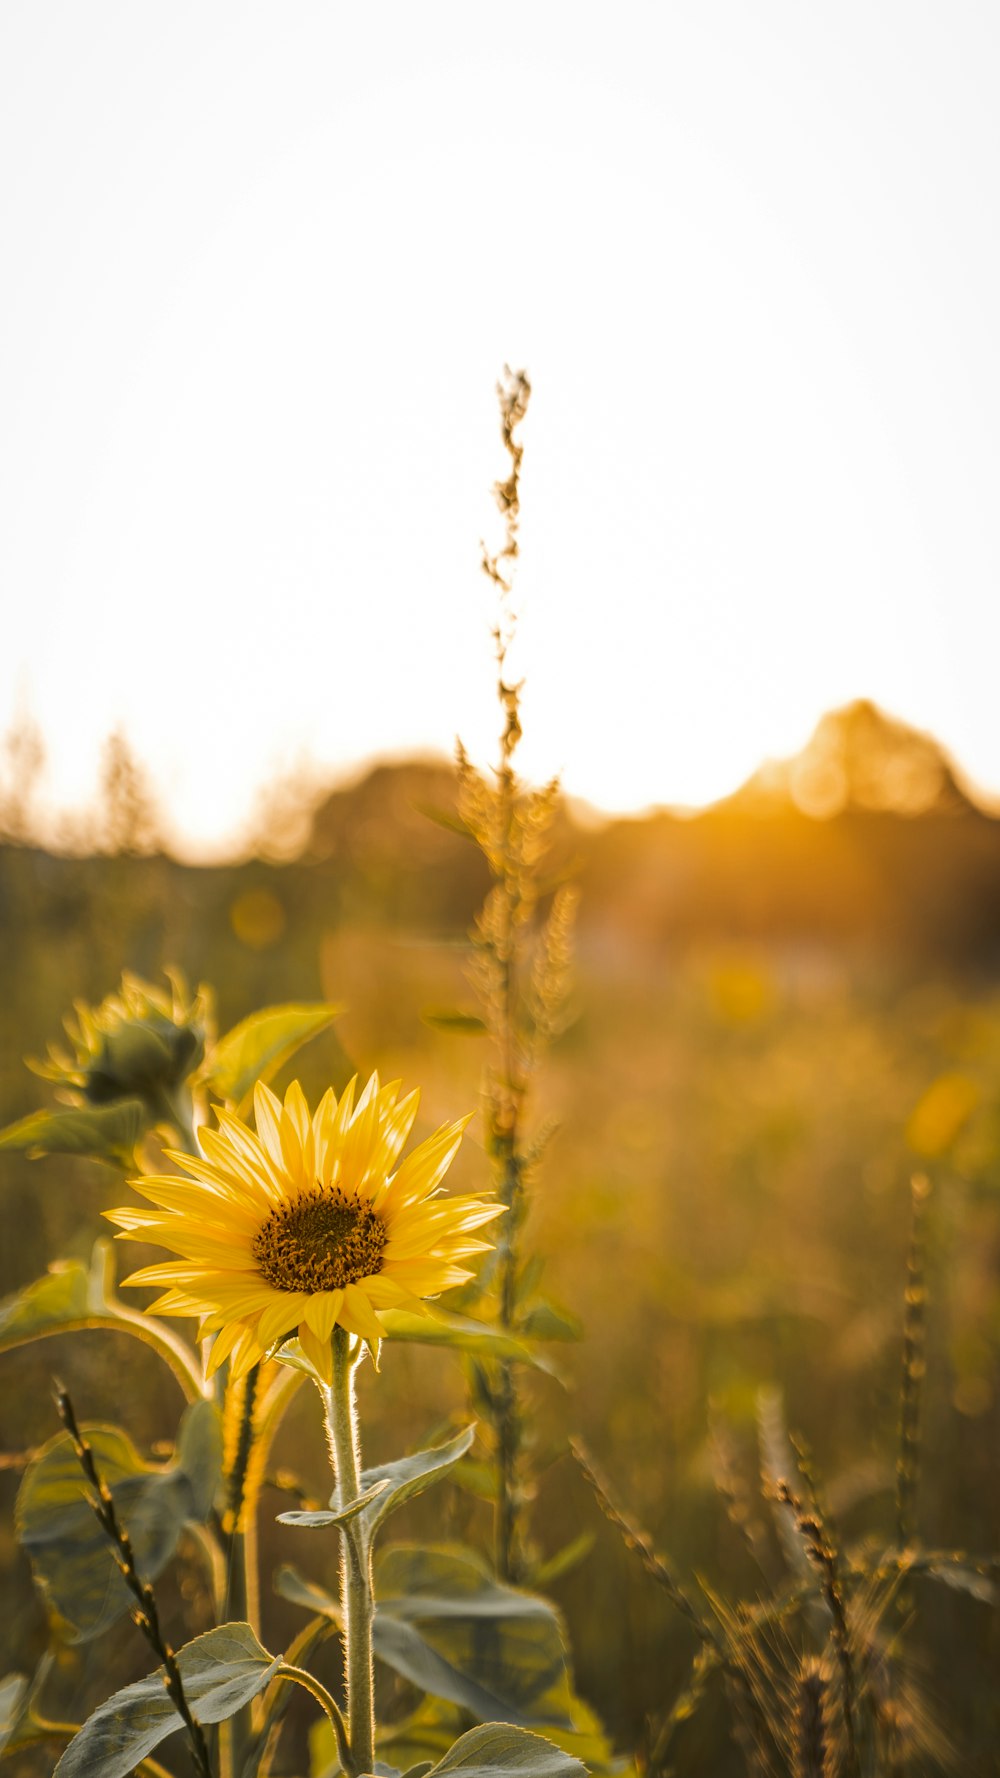 Sonnenblume Pictures  Download Free Images on Unsplash